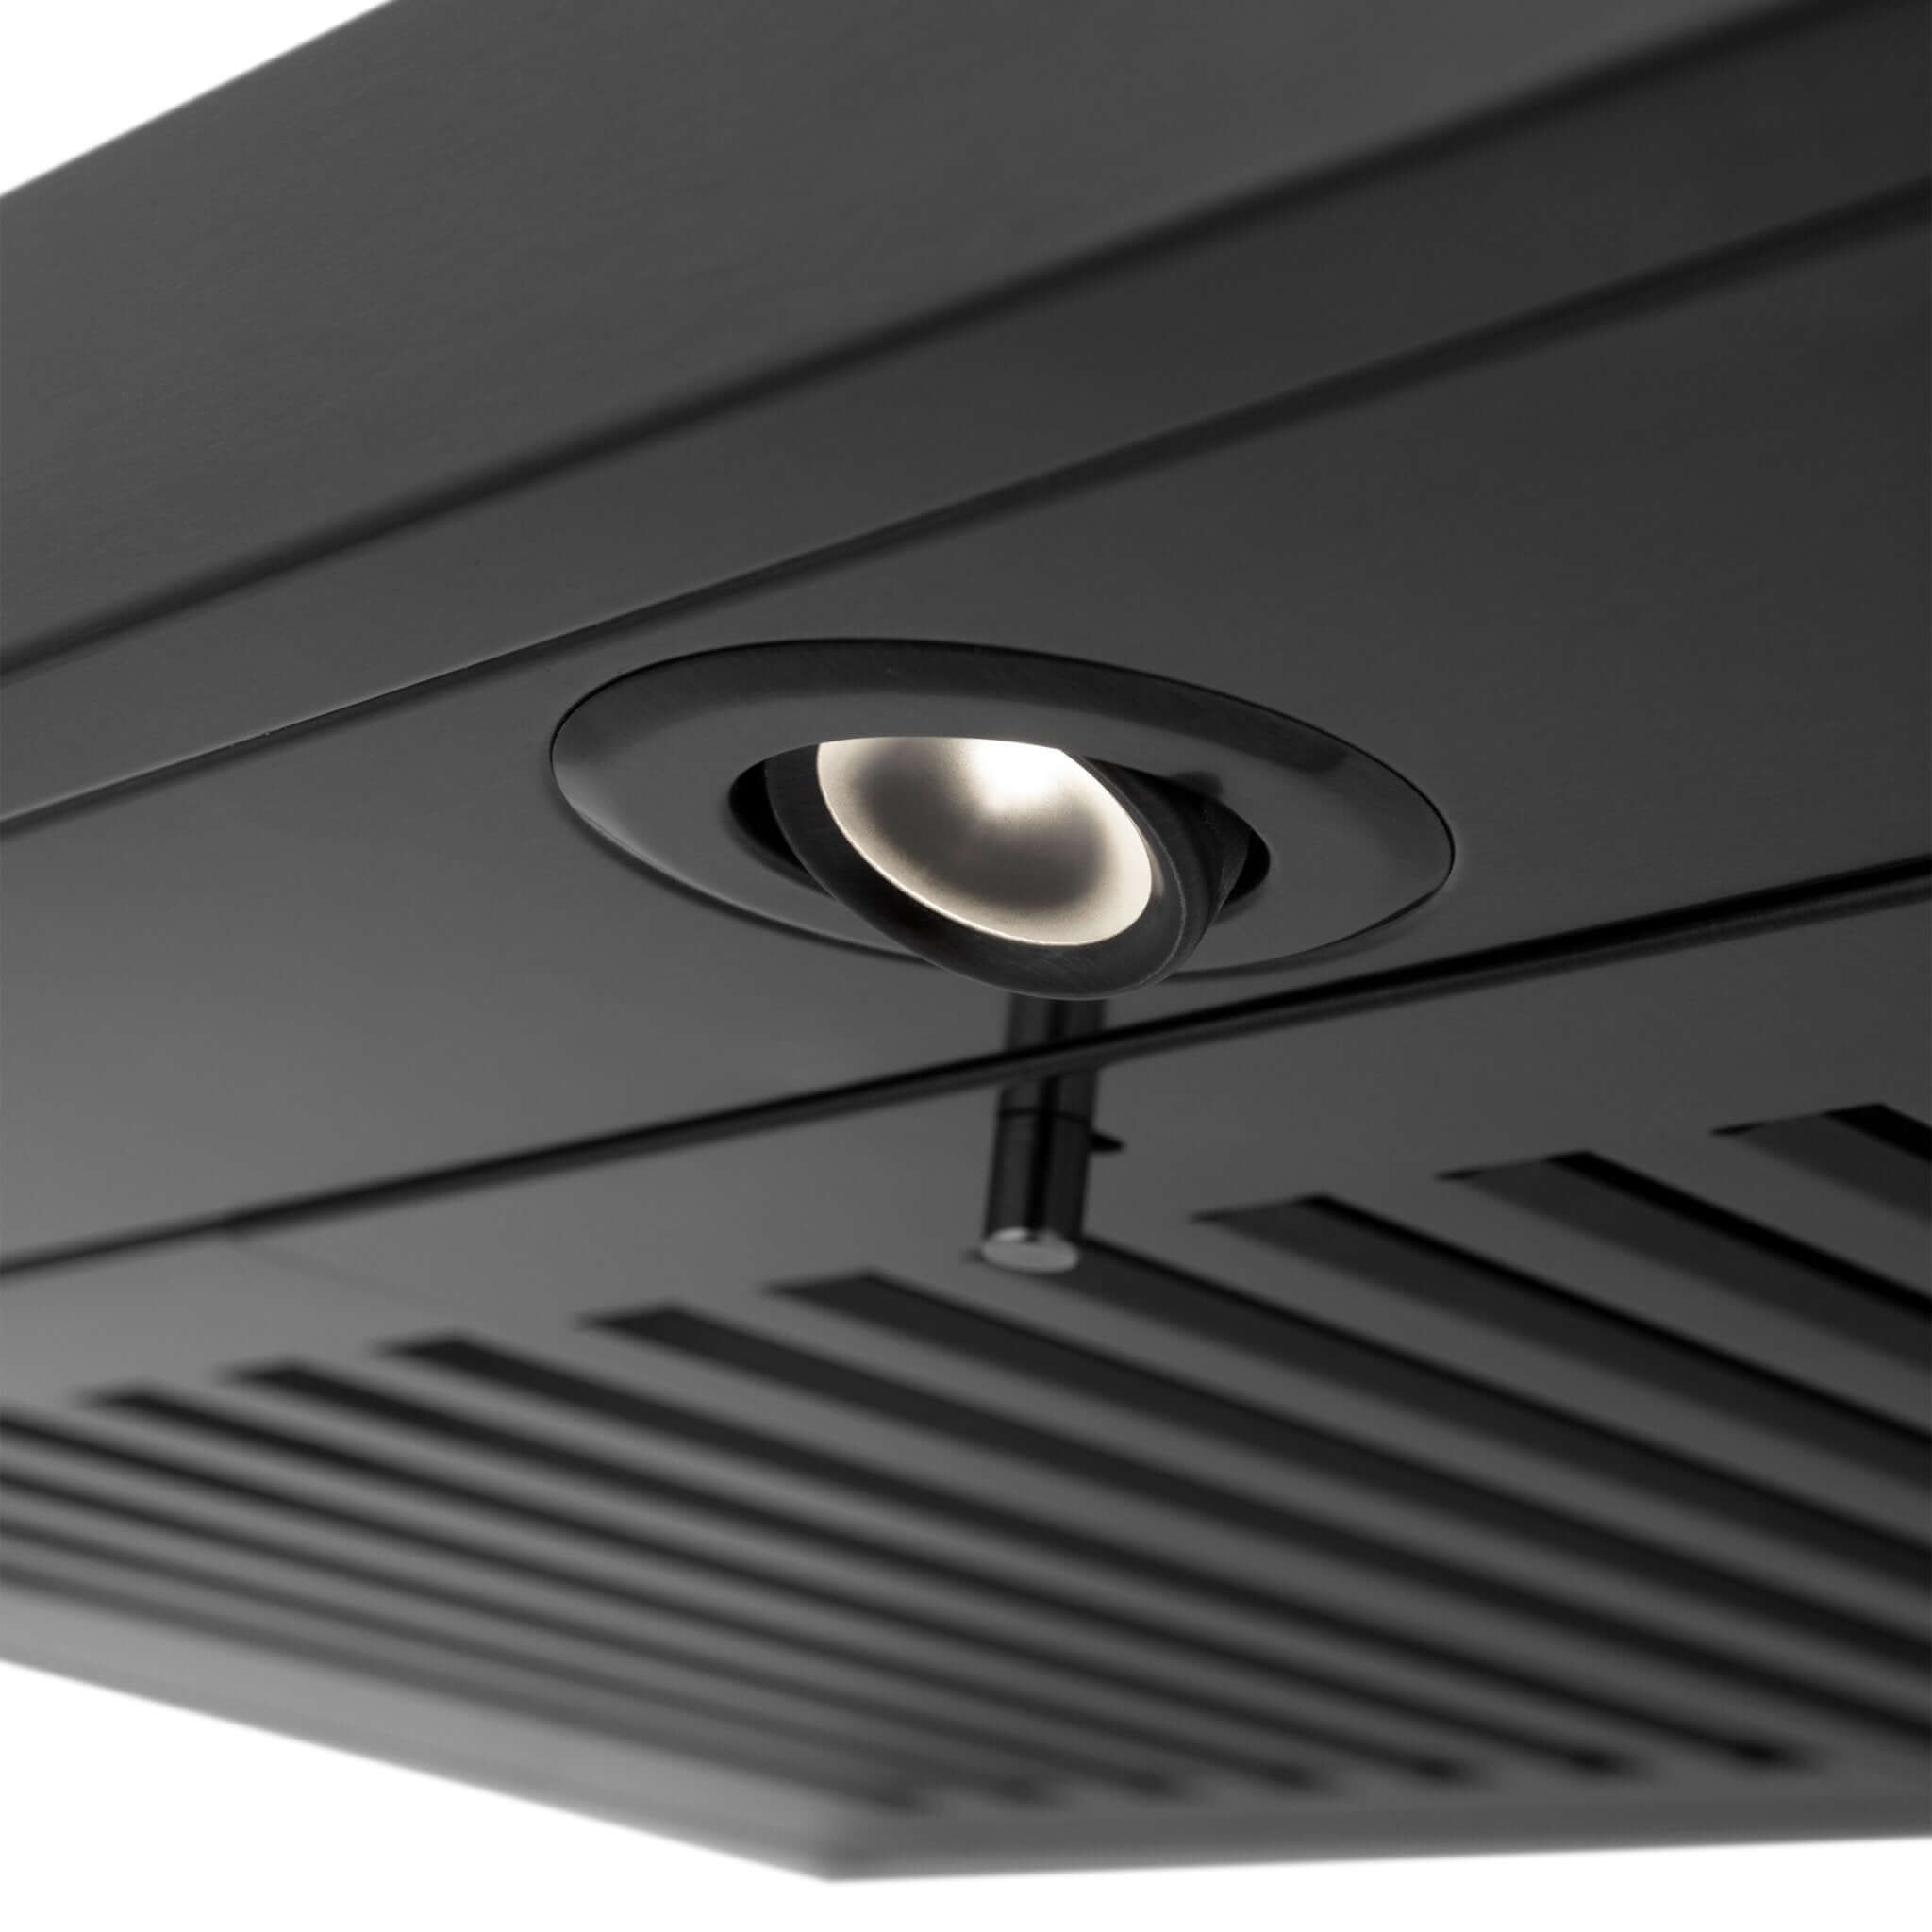 ZLINE Convertible Vent Wall Mount Range Hood in Black Stainless Steel with Crown Molding (BSKBNCRN) directional LED lighting